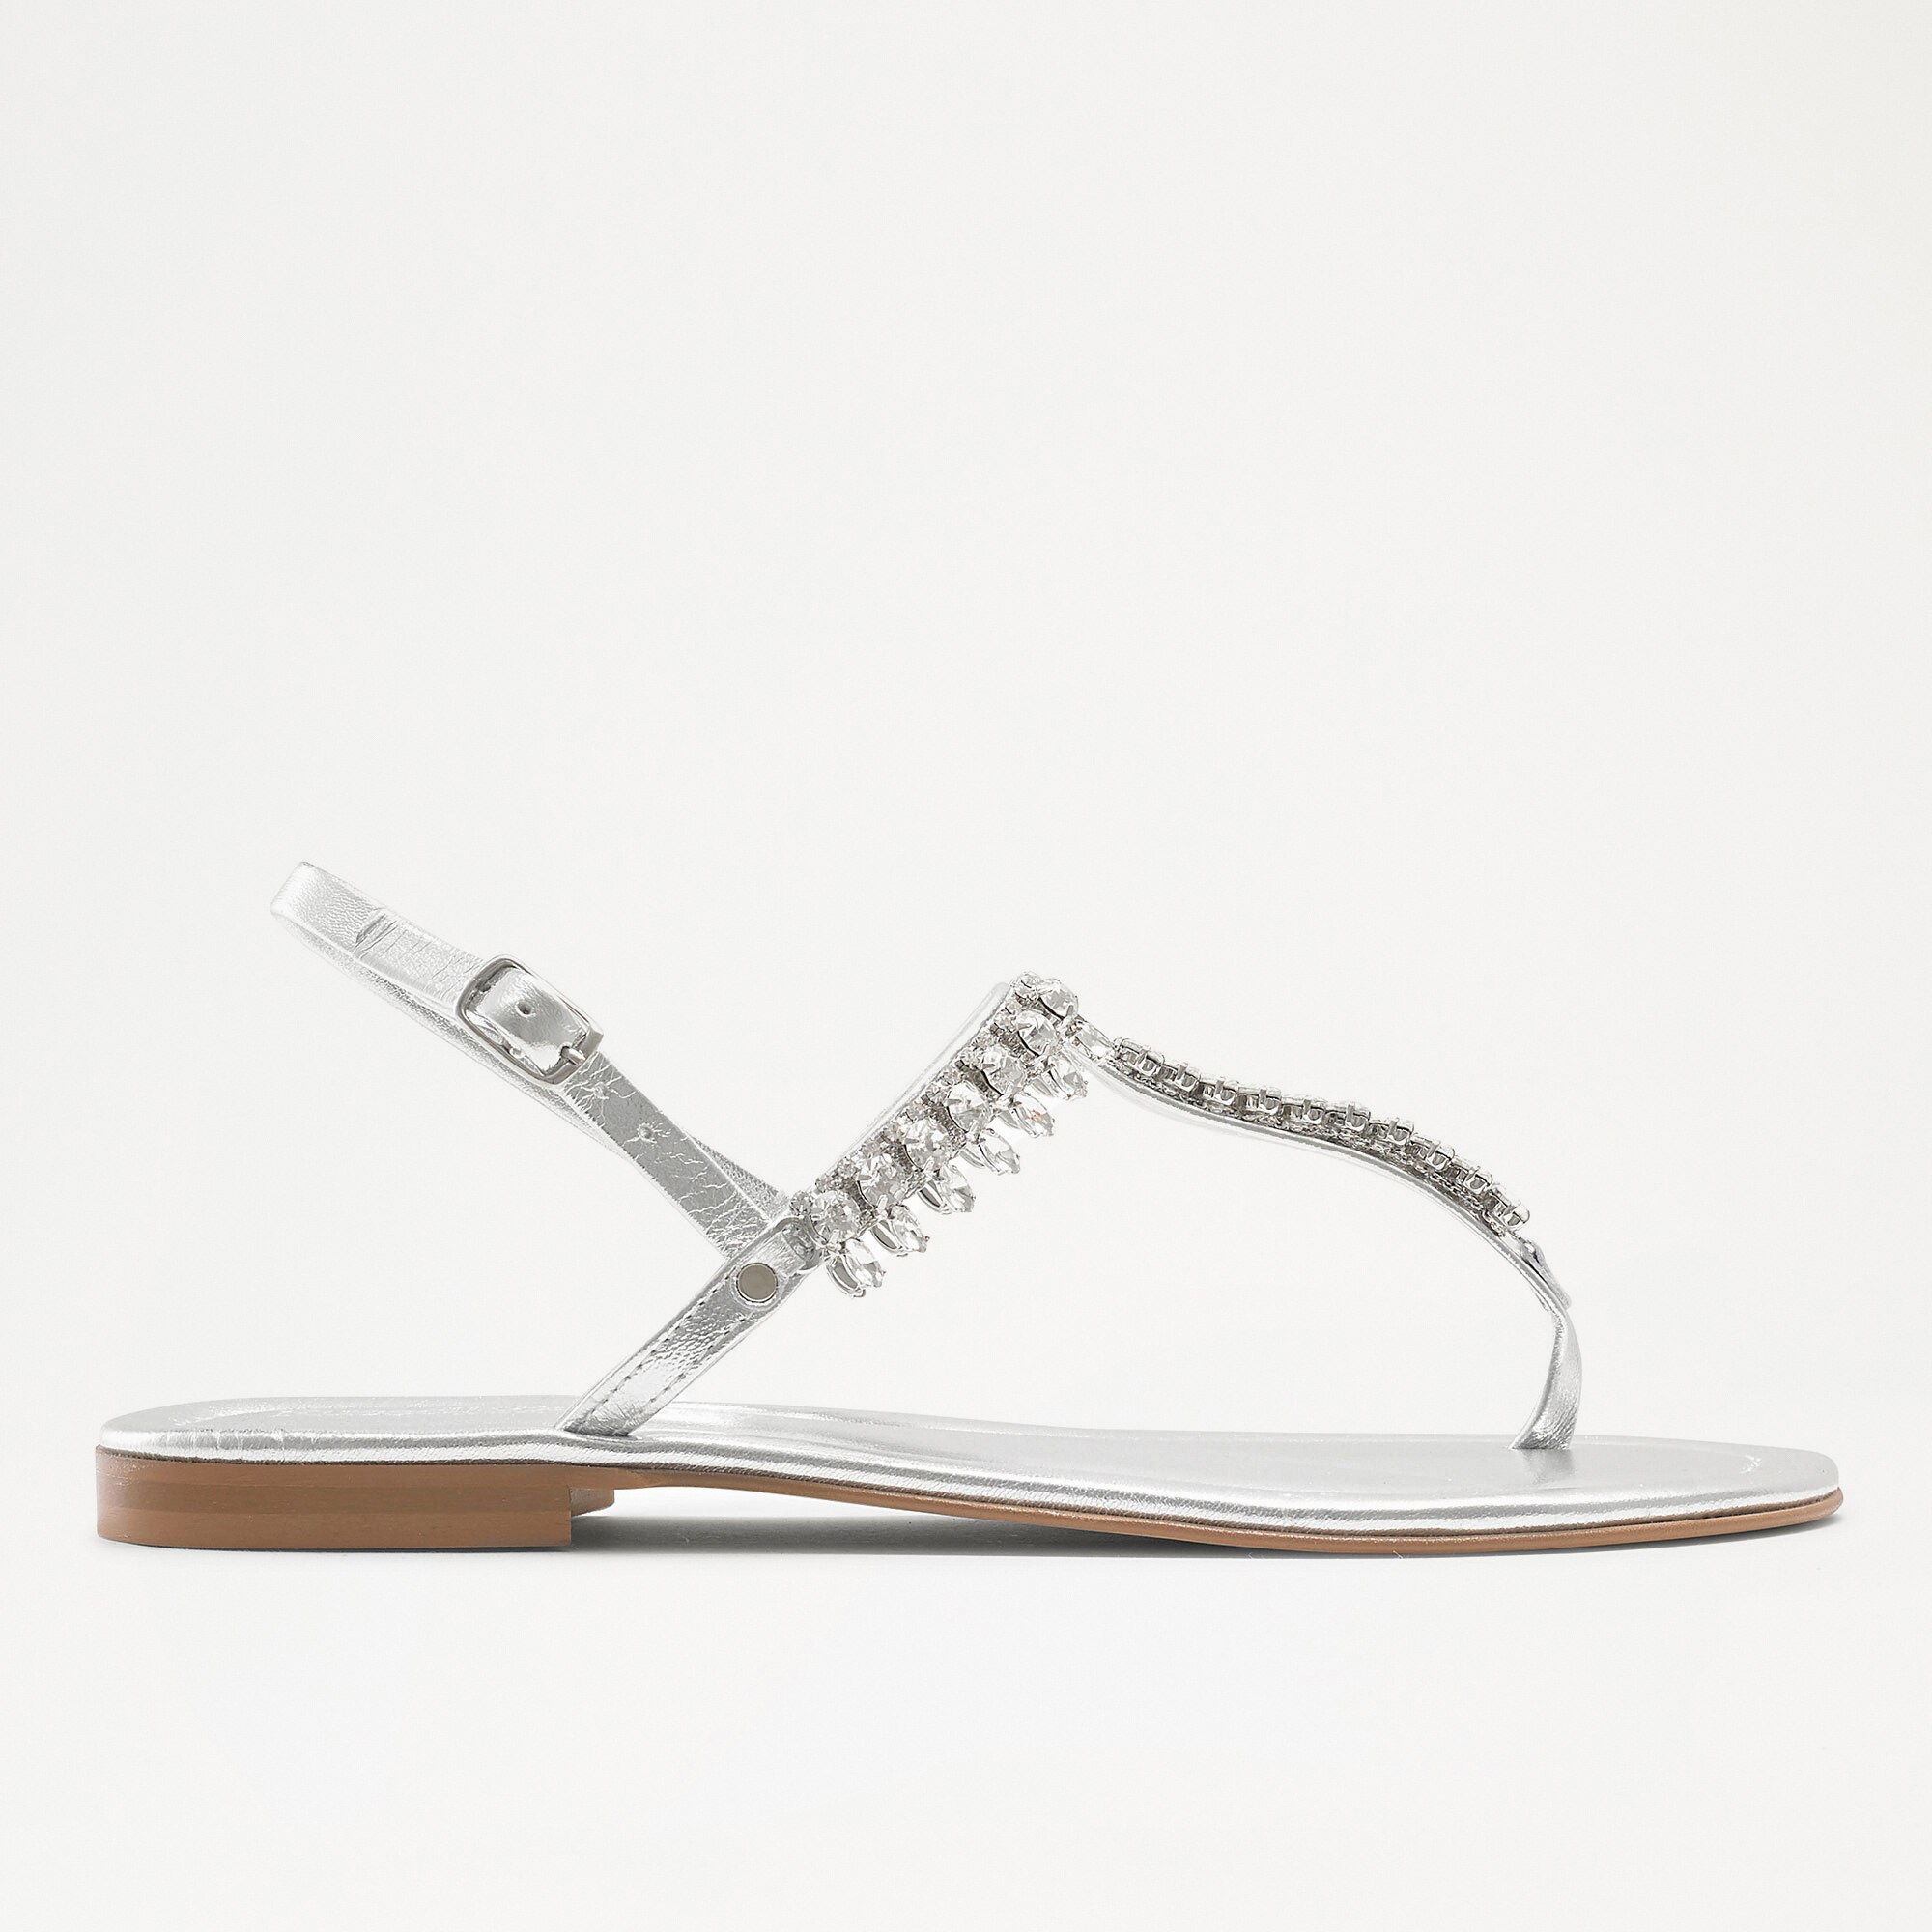 CRYSTAL Embellished Sandal in Silver Calf | Russell & Bromley